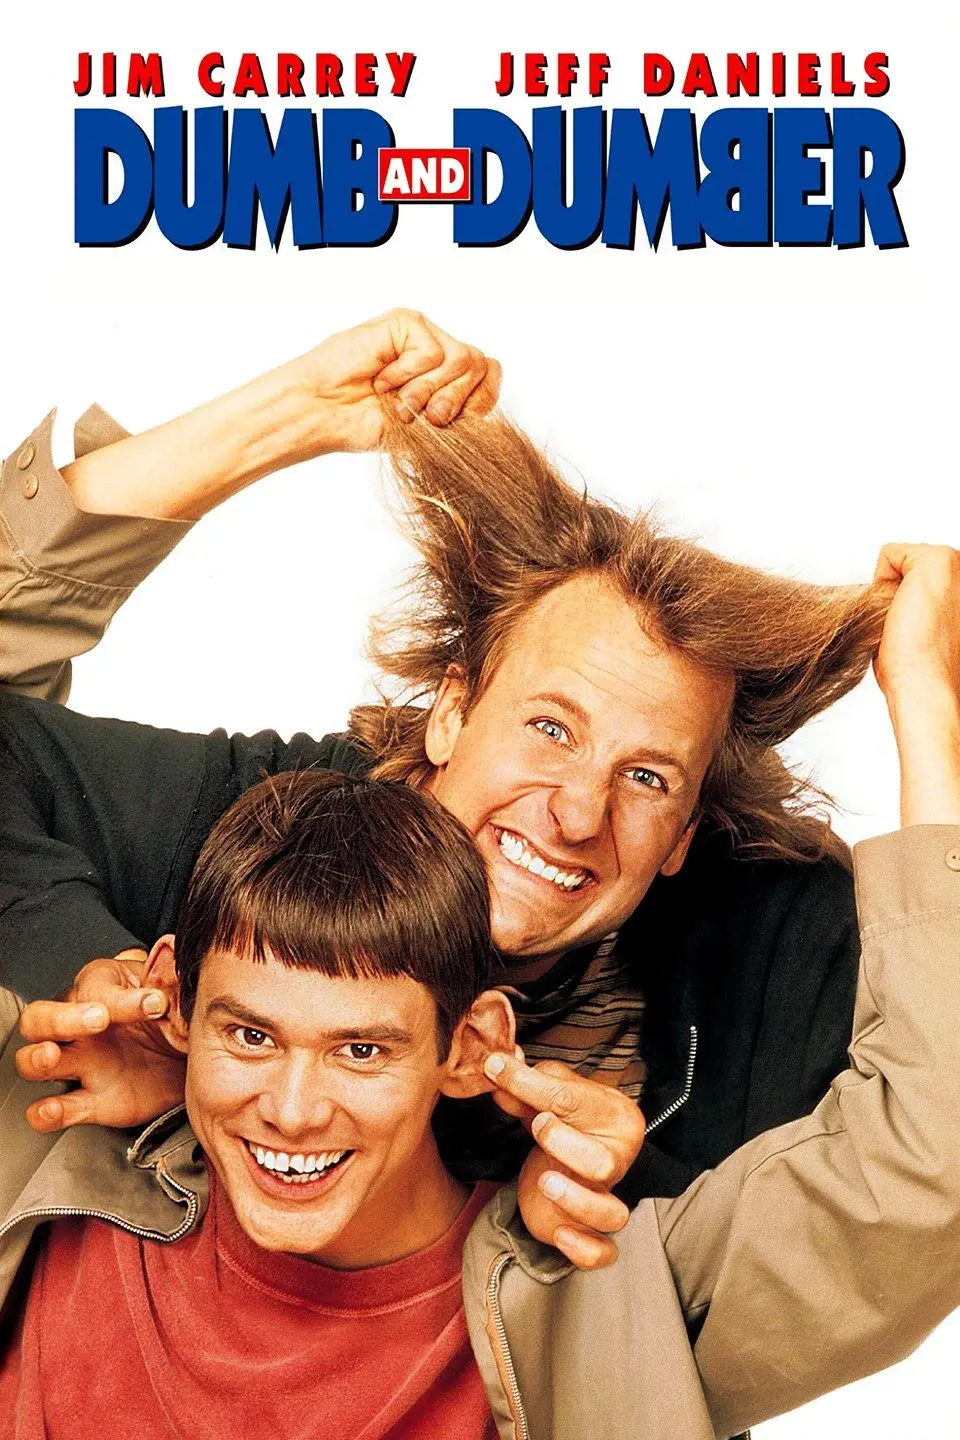 Dumb and Dumber earned $247.3 million from the theatres nationwide, while the budget of the picture was only $17 million